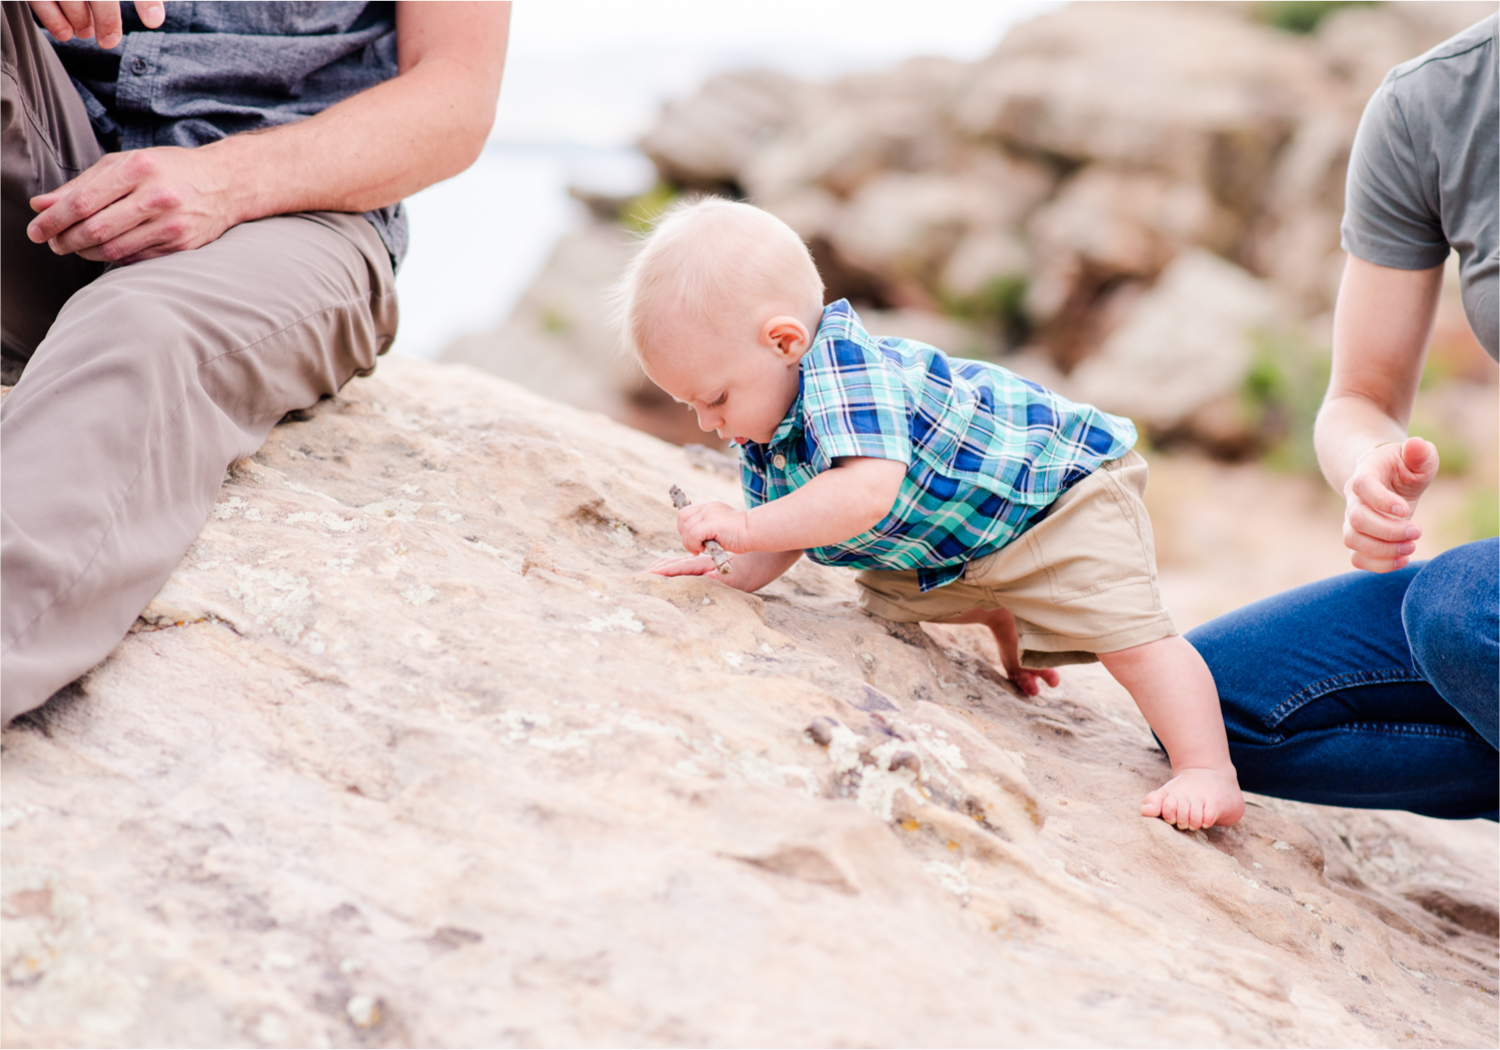 Colorado Mountain Engagement at Horsetooth Reservoir for Wanderlust Couple and their son | Britni Girard Photography